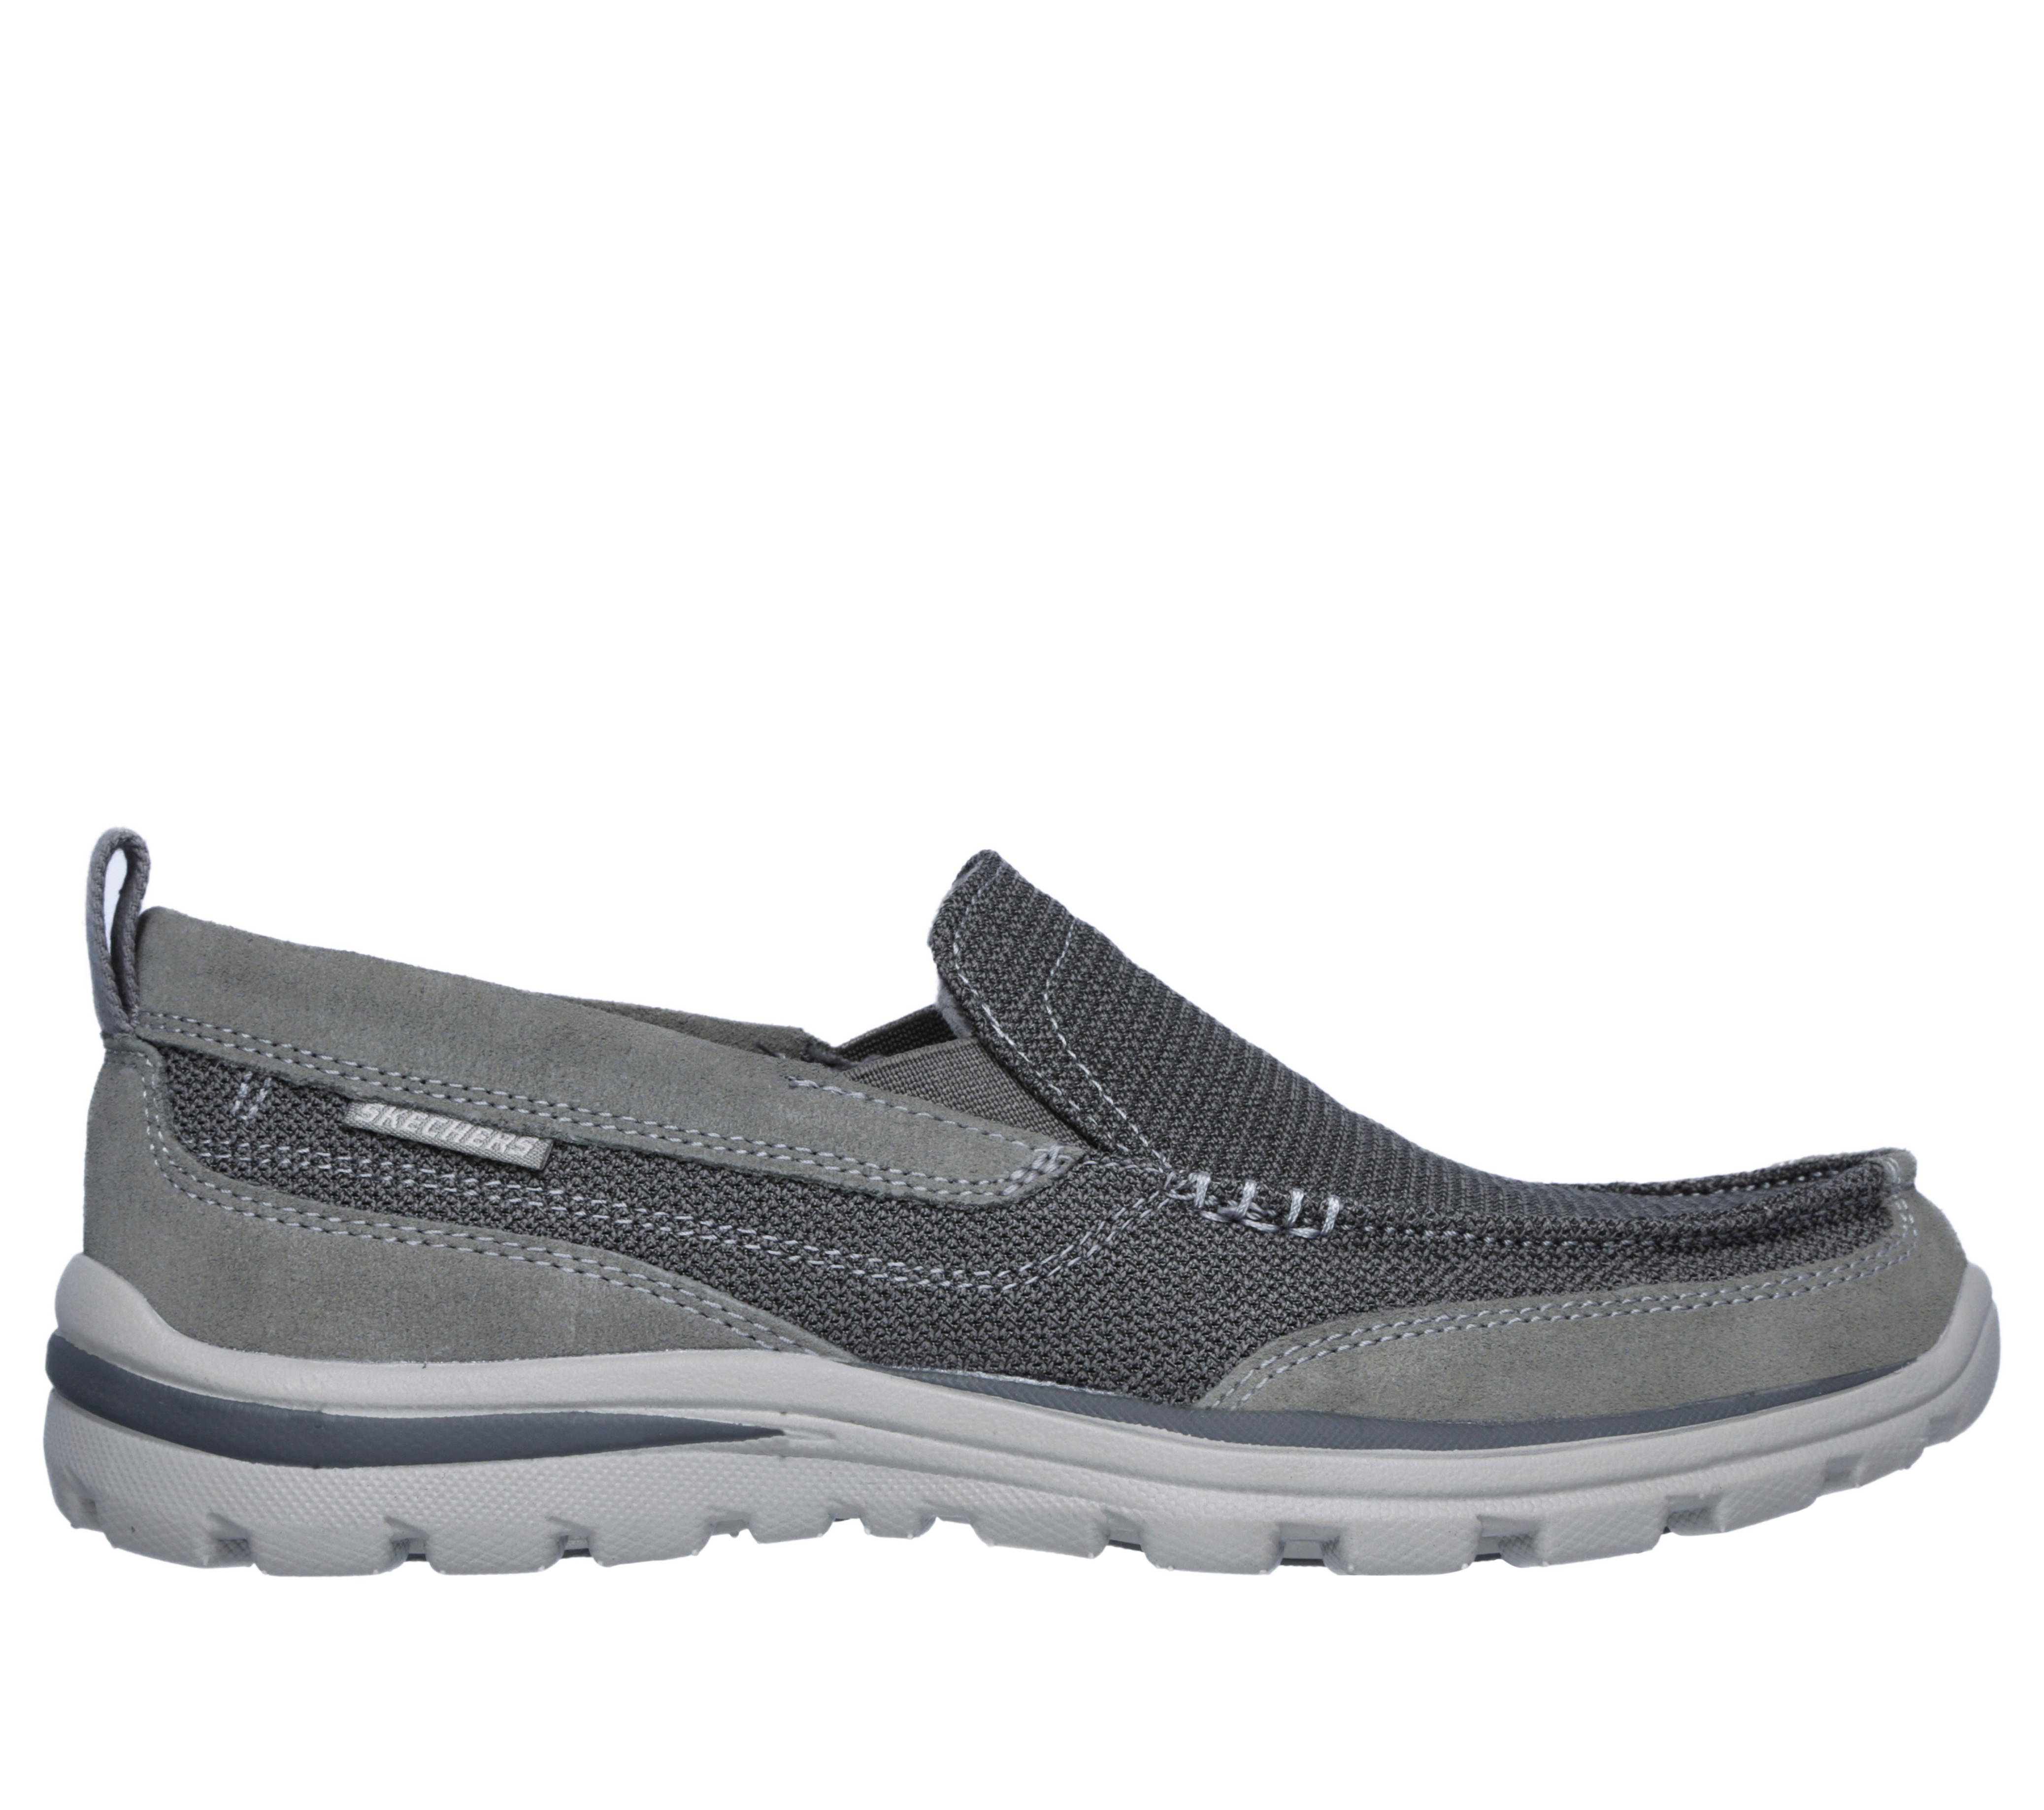 Shop the Relaxed Fit: Superior - Milford | SKECHERS